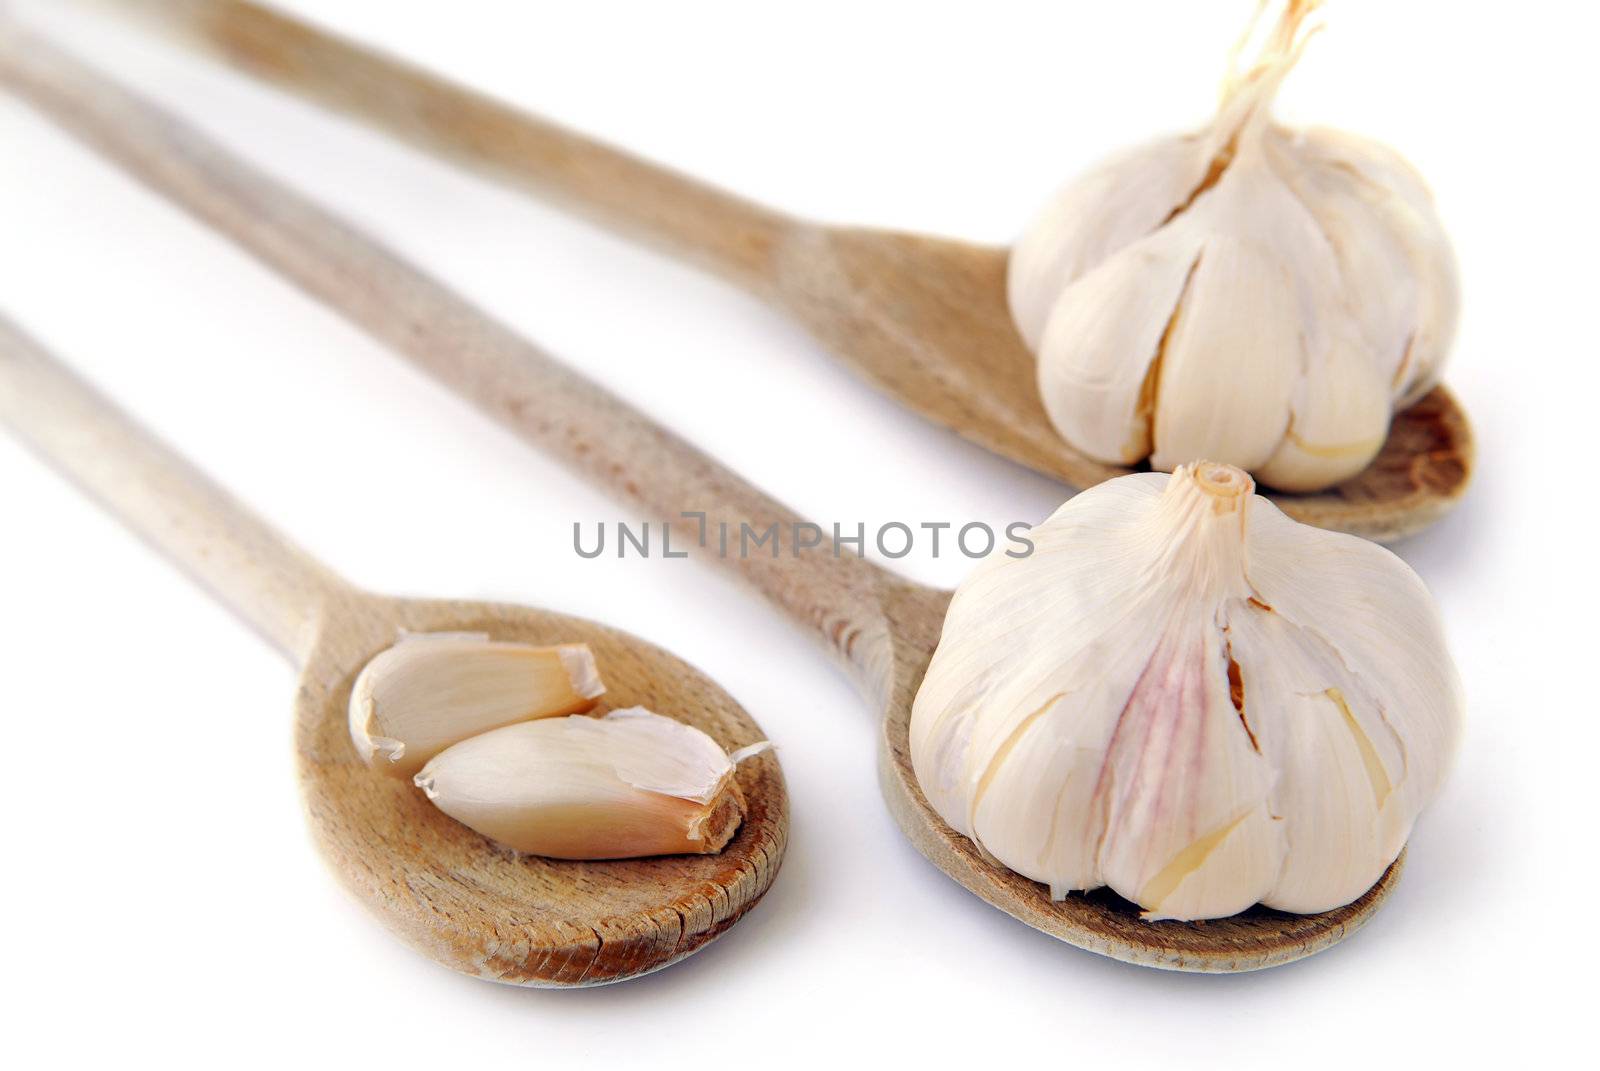 Bulbs and cloves of garlic on wooden spoons isolated on white background